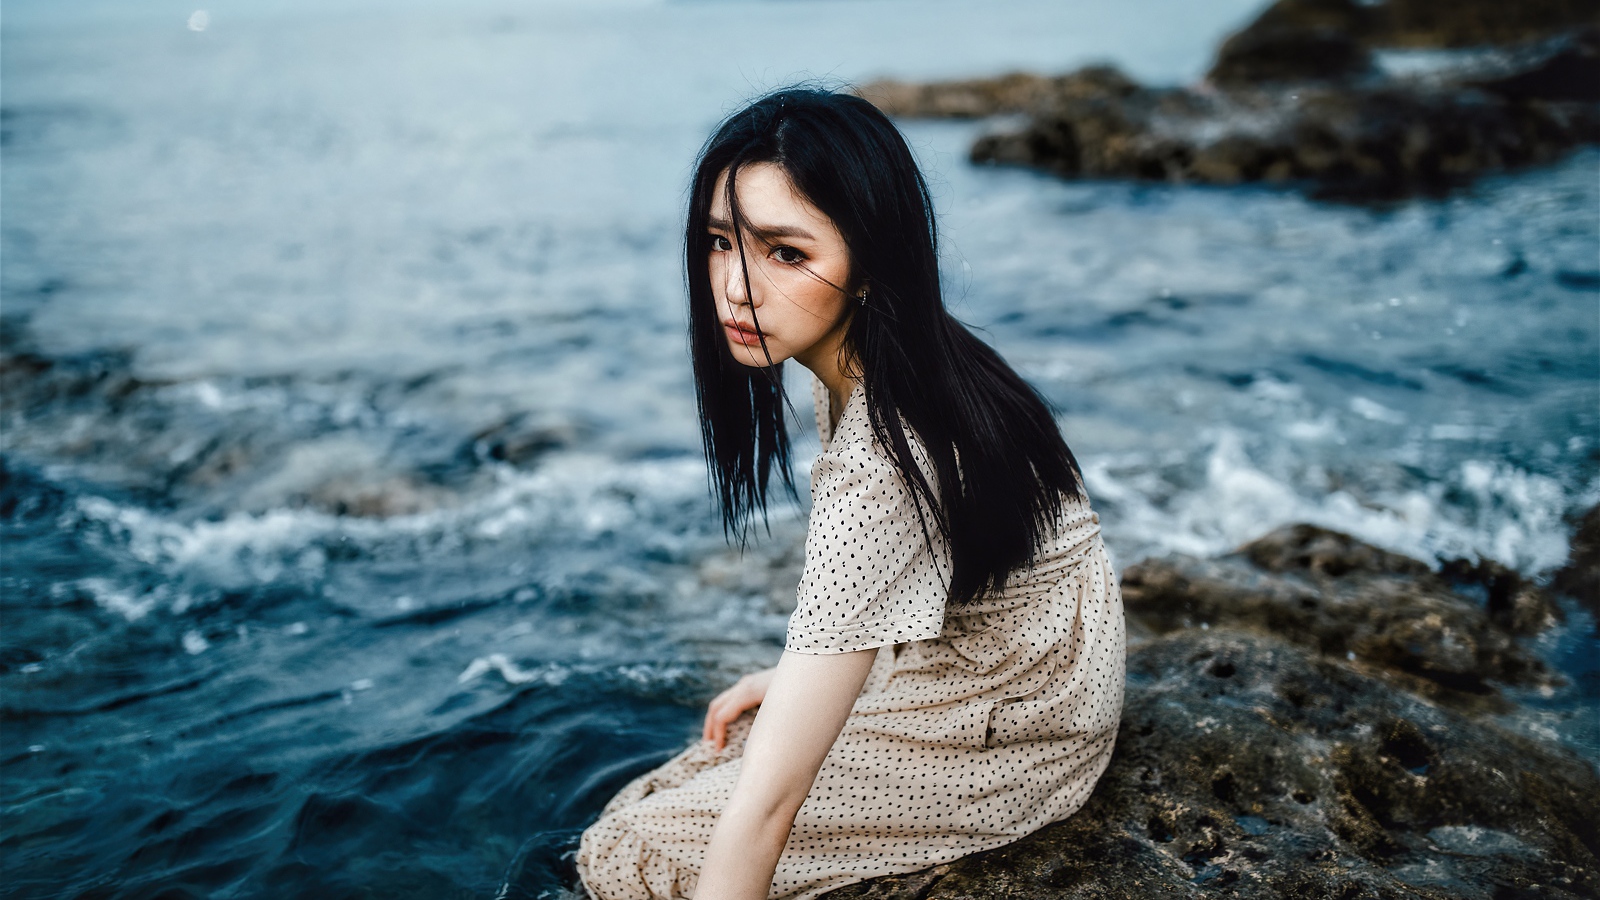 Young Asian girl sitting on a stone by the water